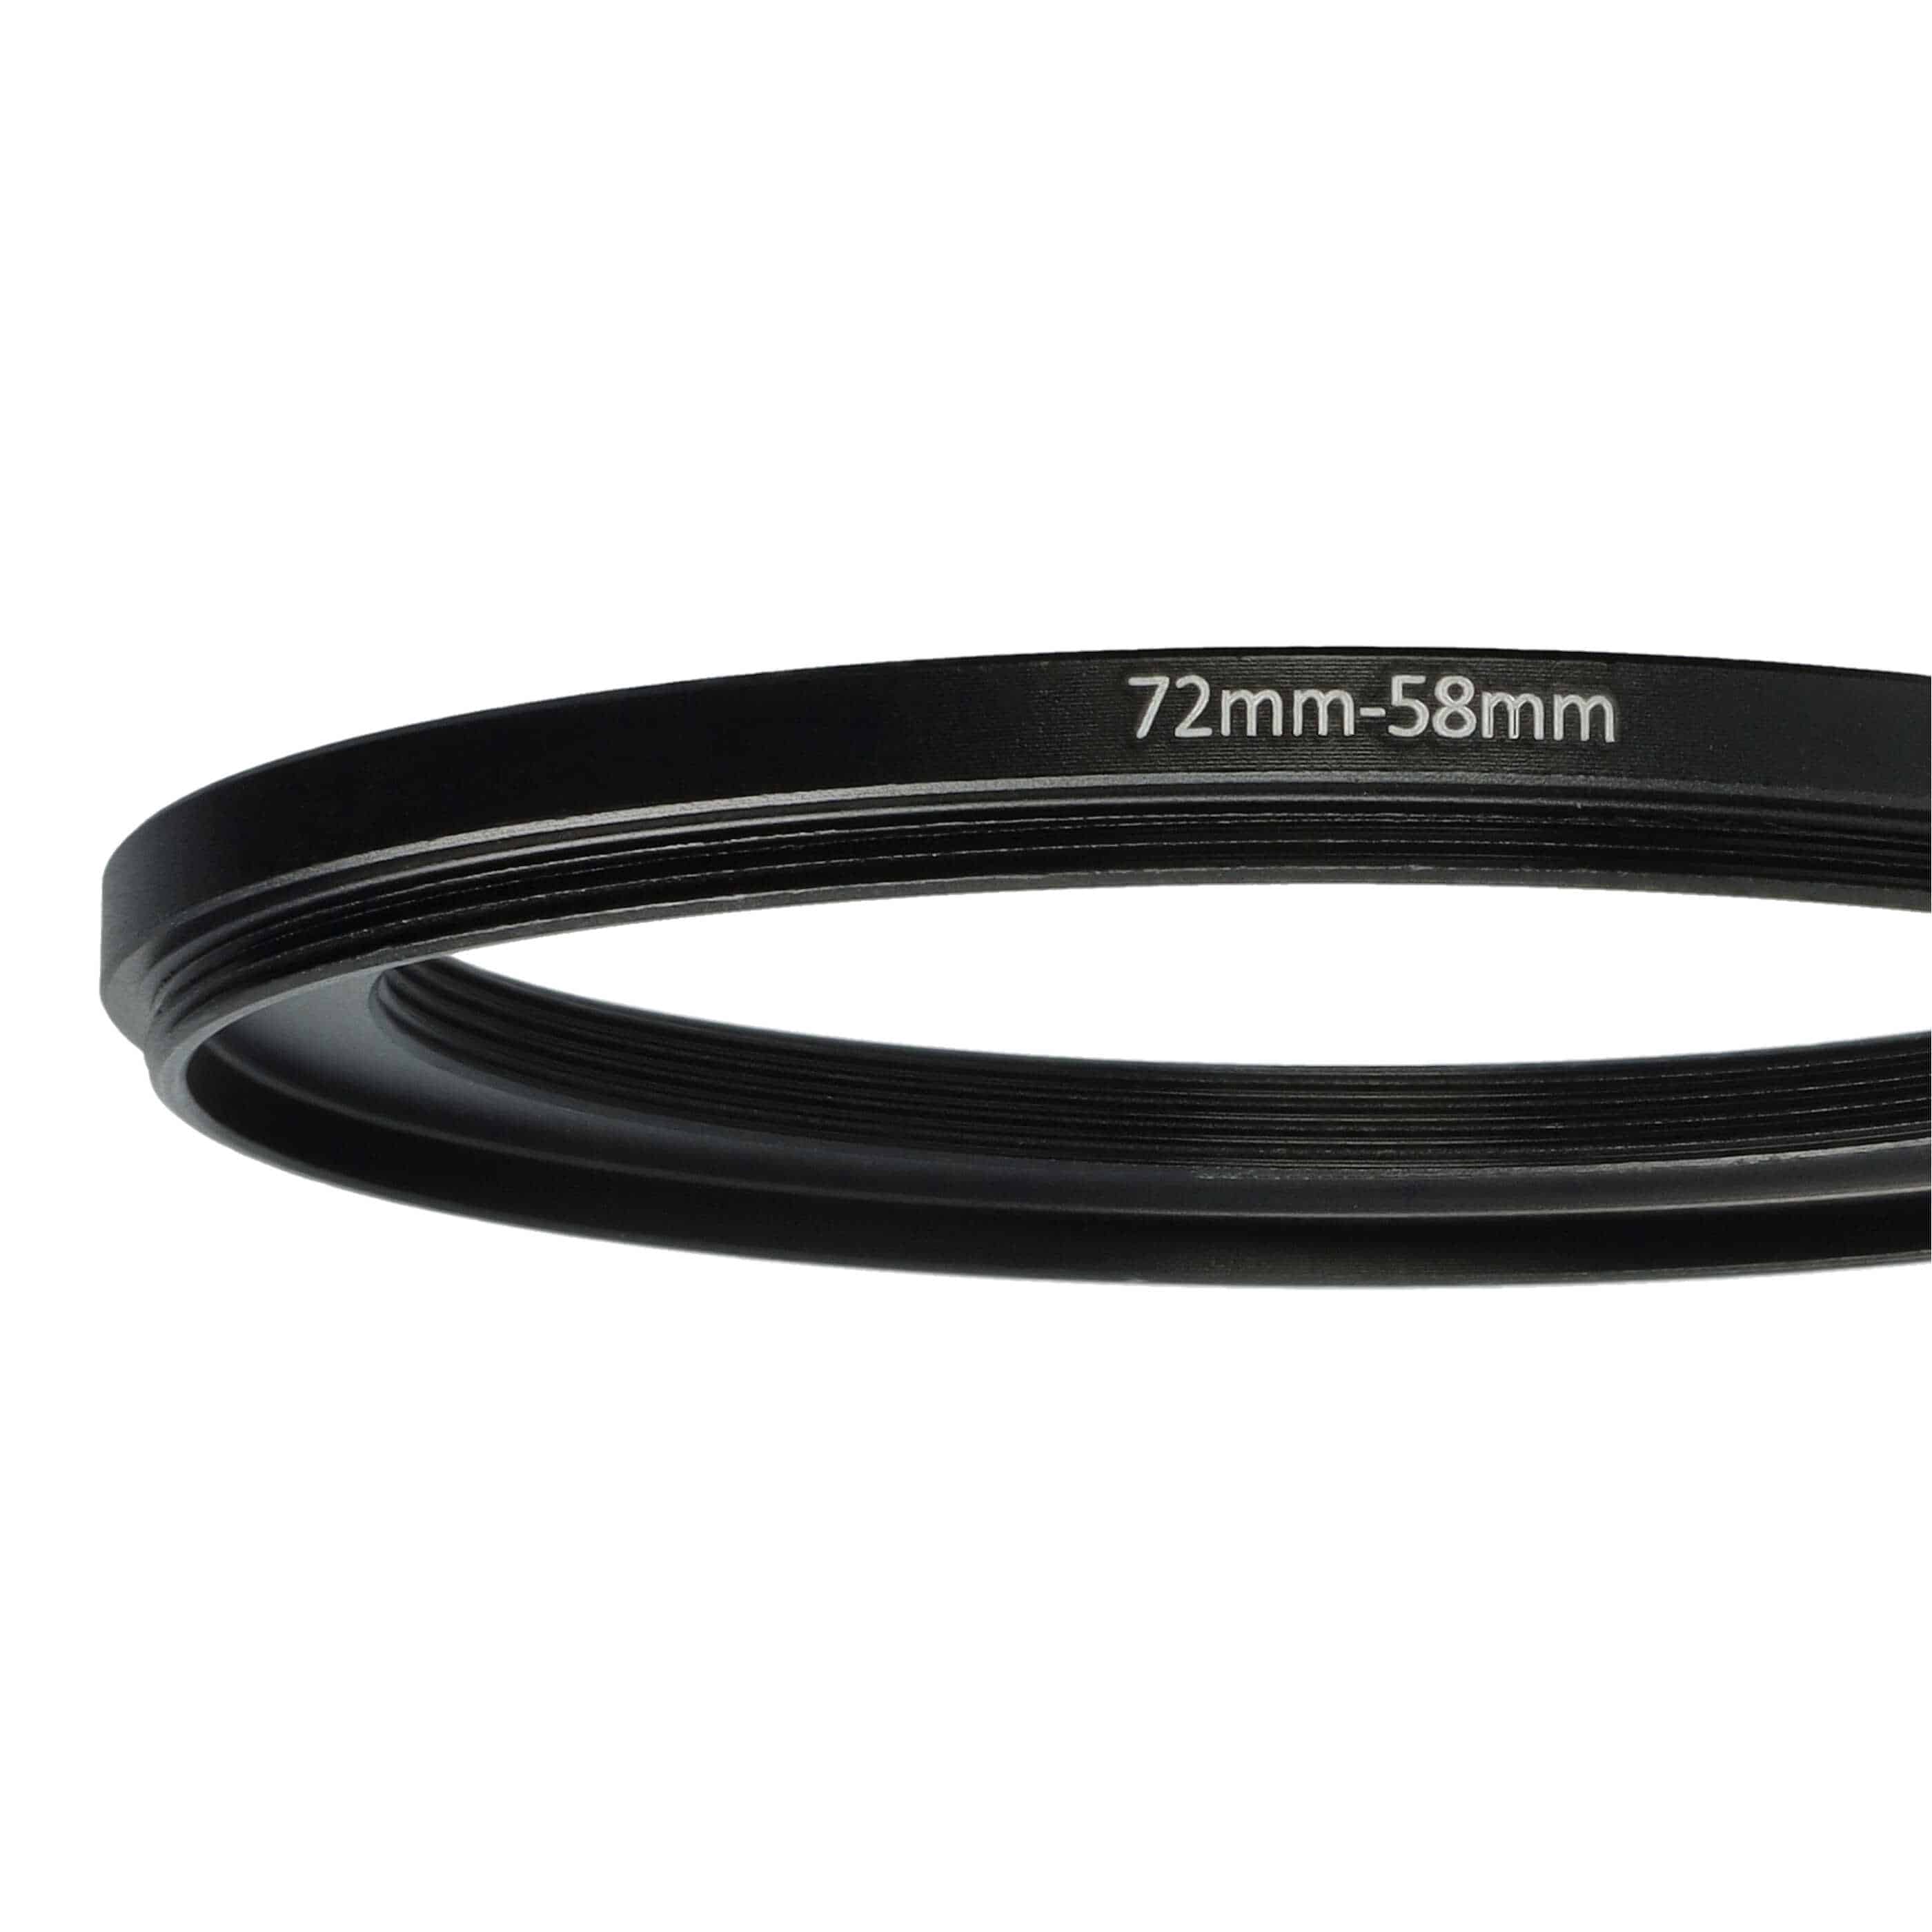 Step-Down Ring Adapter from 72 mm to 58 mm for various Camera Lenses